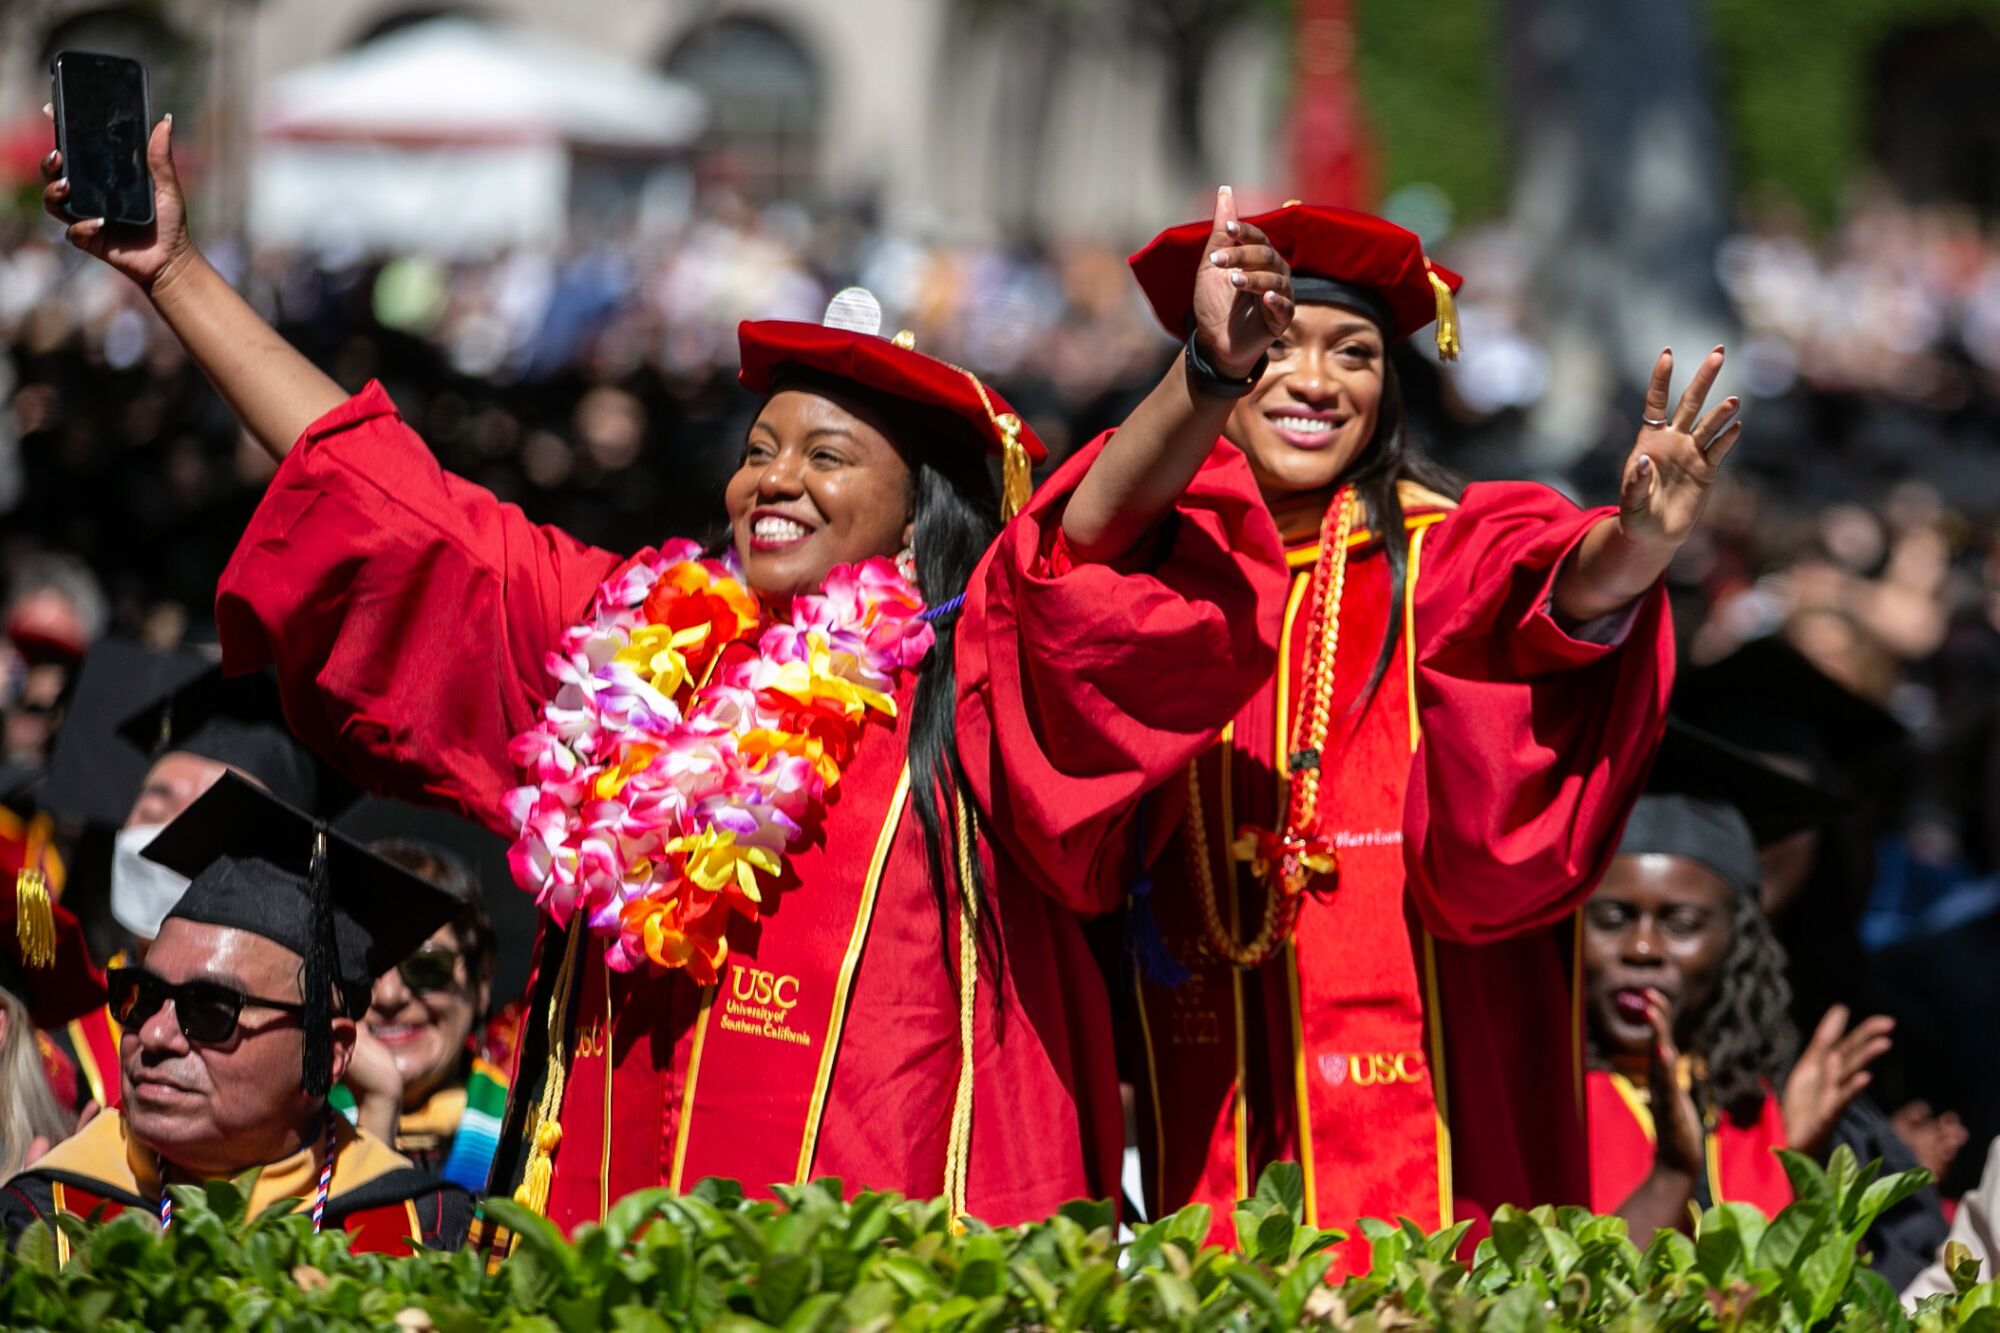 Two USC graduates, both in red robes and one wearing a lei, smile at commencement.